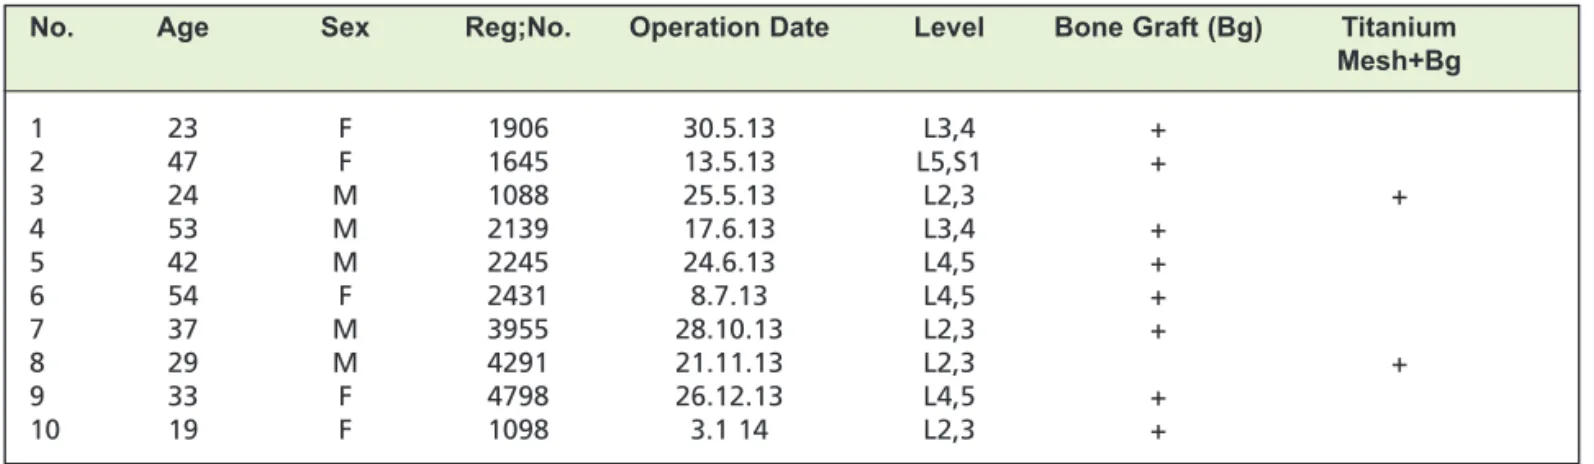 Table I: Demographic data of patients (source from spine registry ; YOH)